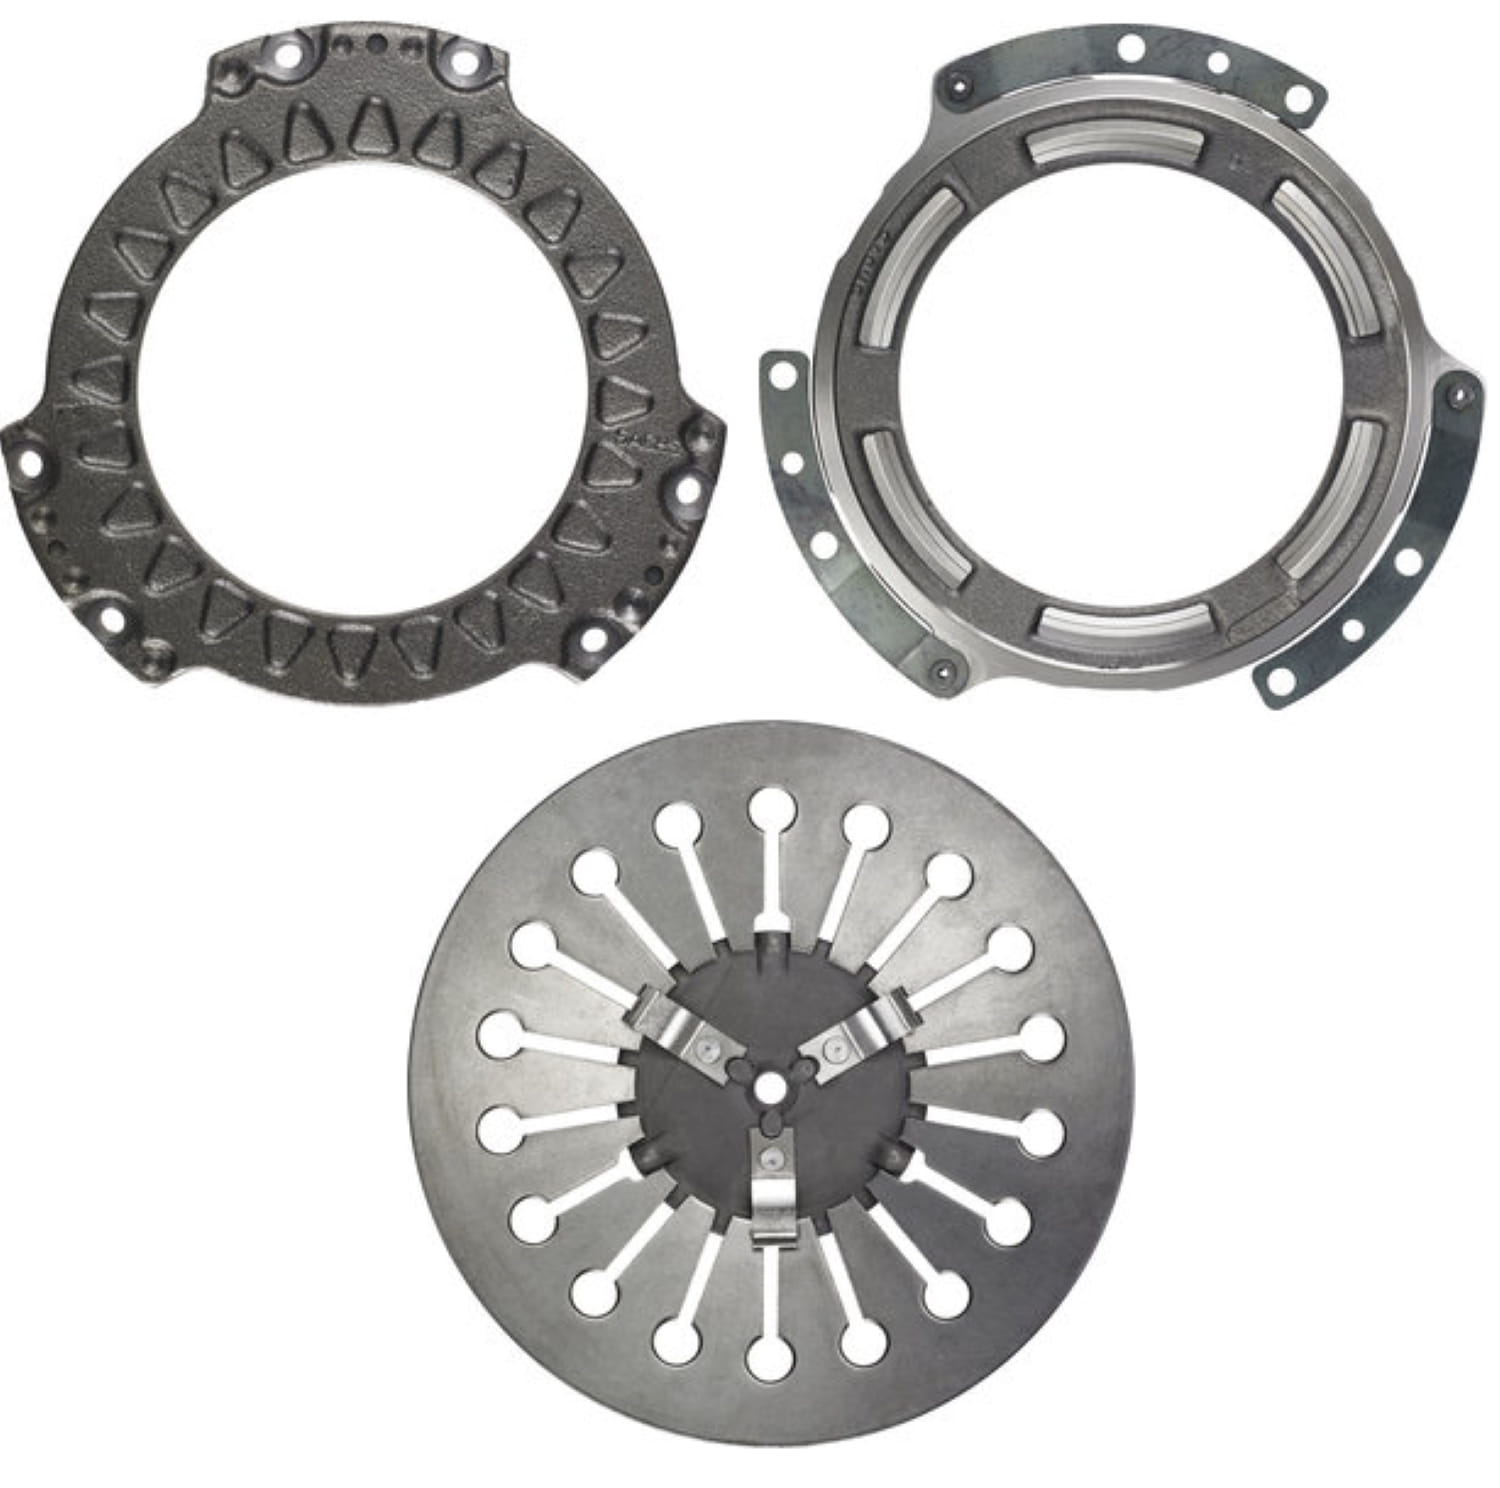 BMW K clutch cover plate, pressure plate and diaphragm spring